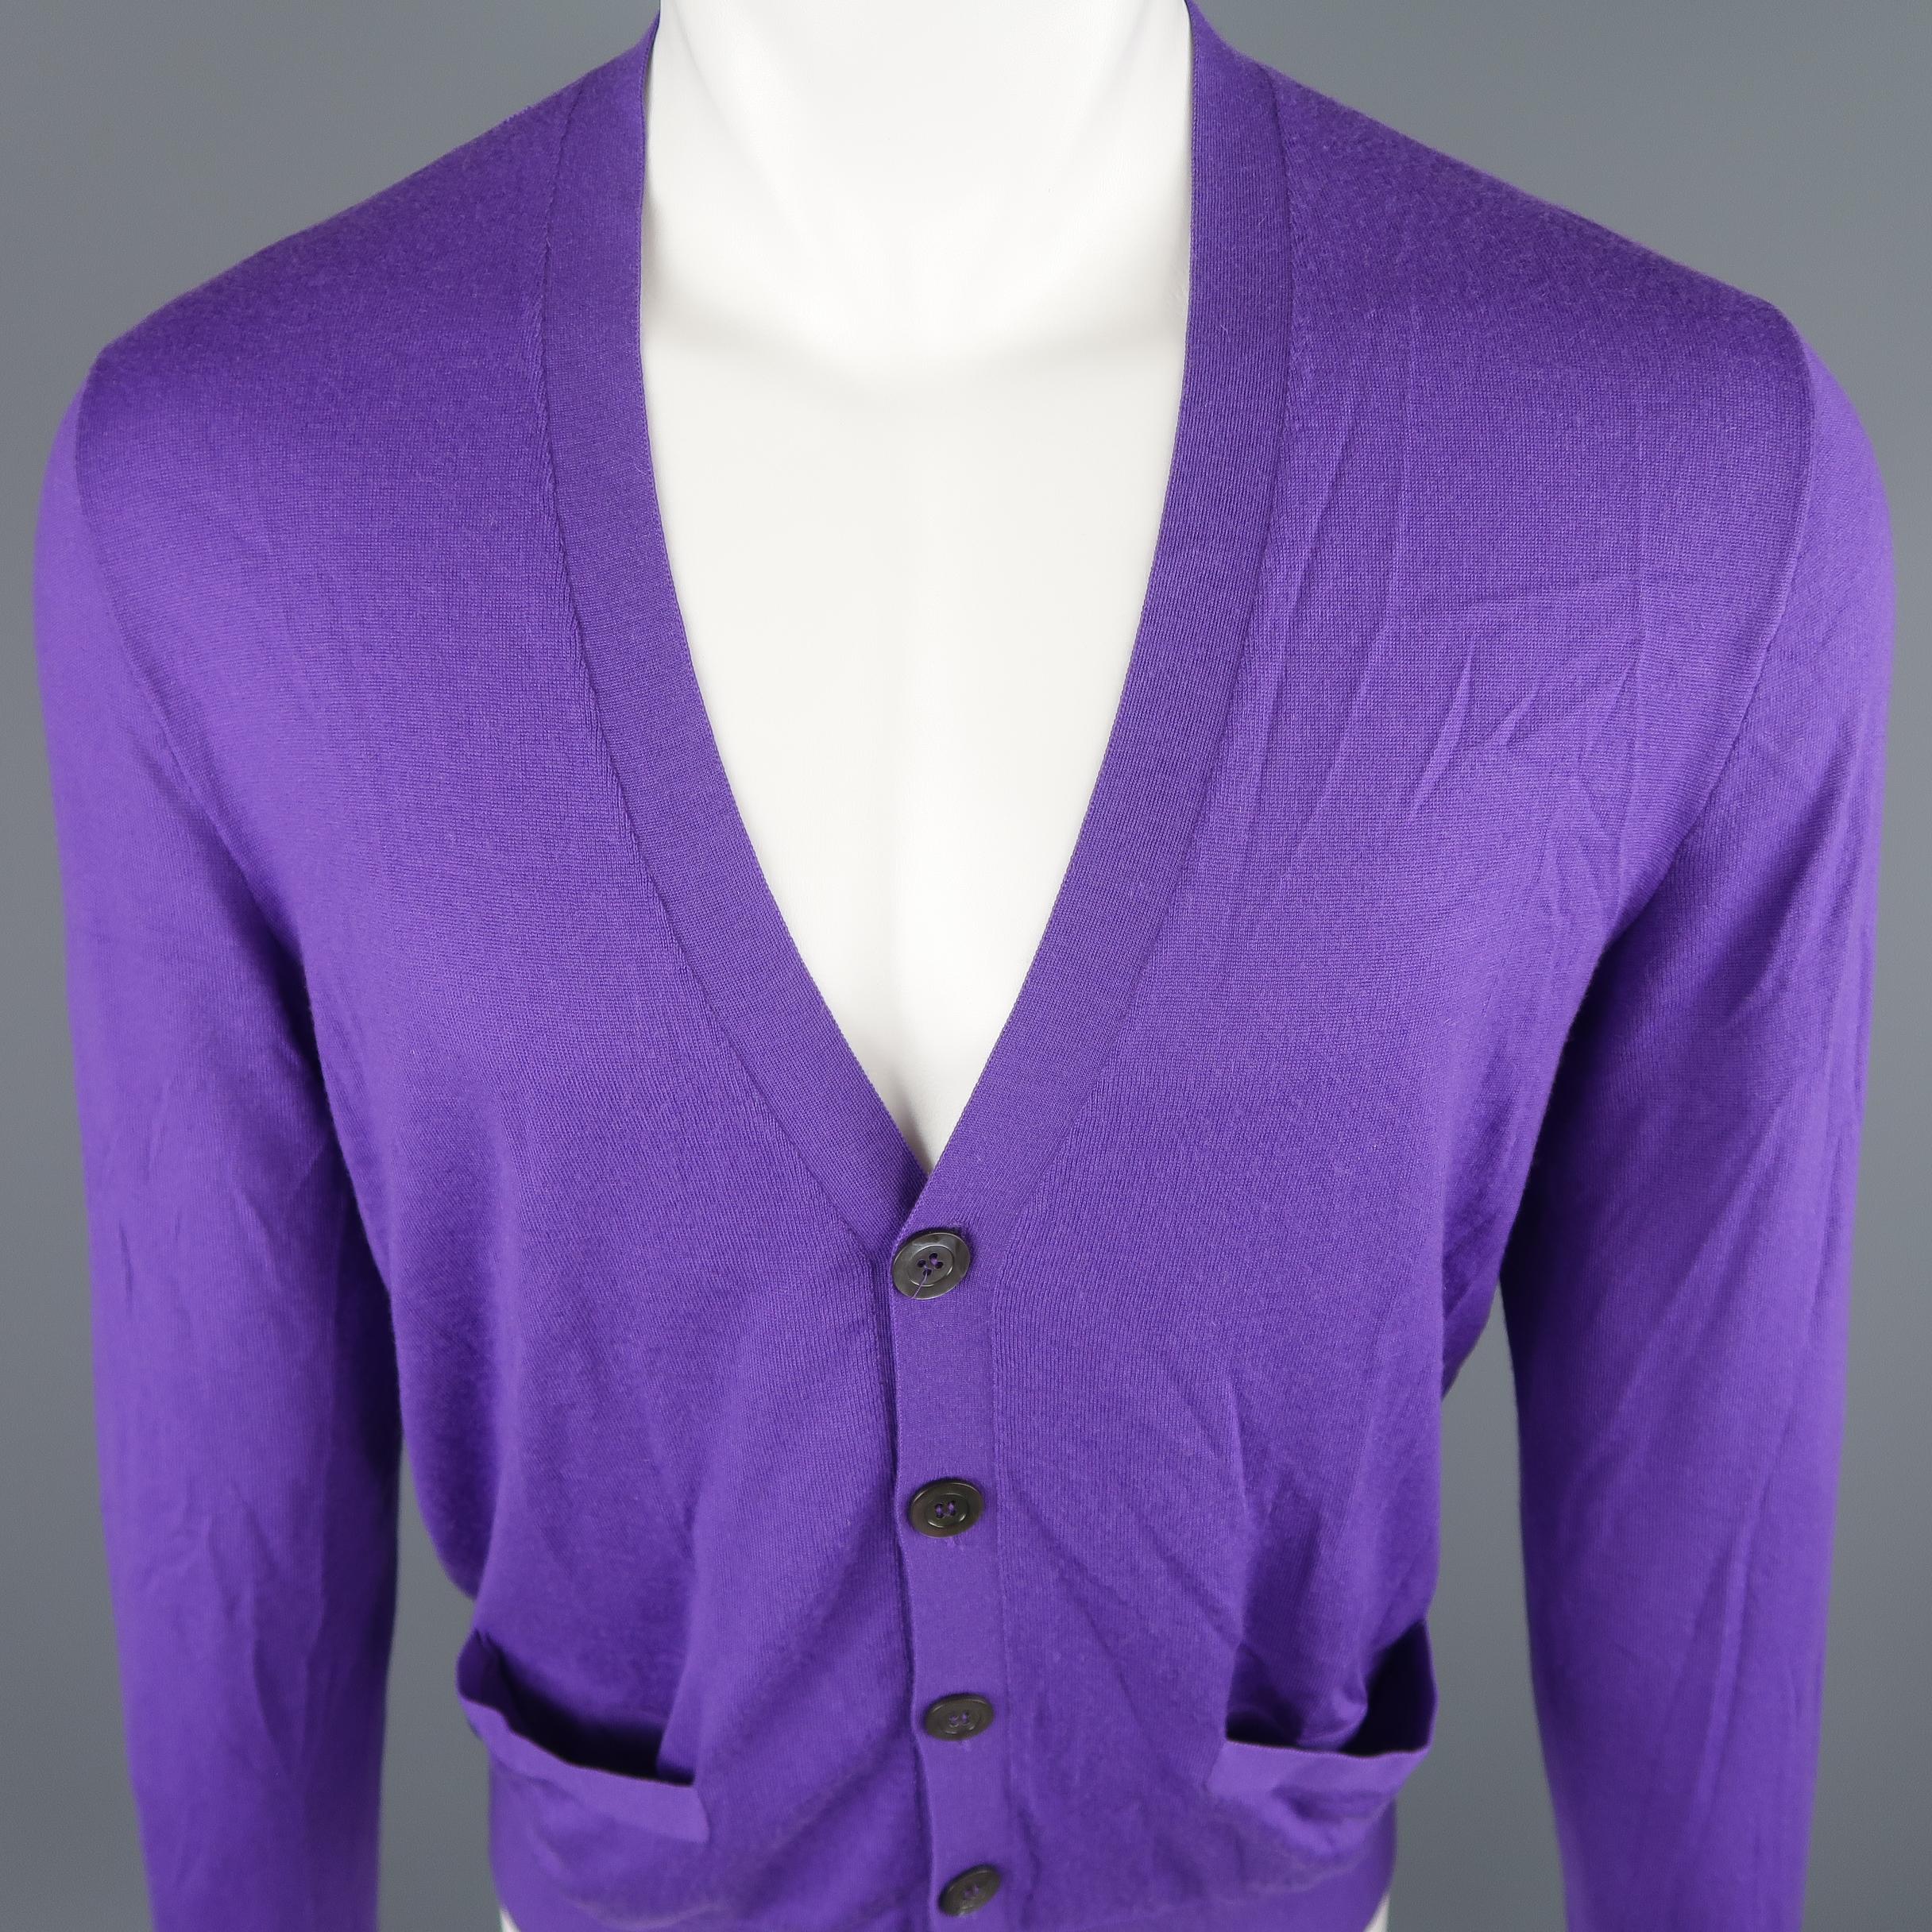 Ralph Lauren Purple Label  cardigan comes in 100% Cashmere in a solid purple tone knit, with a V-neck button down, frontal pockets  and ribbed cuff and waistband. Made in Italy.
 
Good Pre-Owned Condition.
Marked: M
 
Measurements:
 
Shoulder: 17